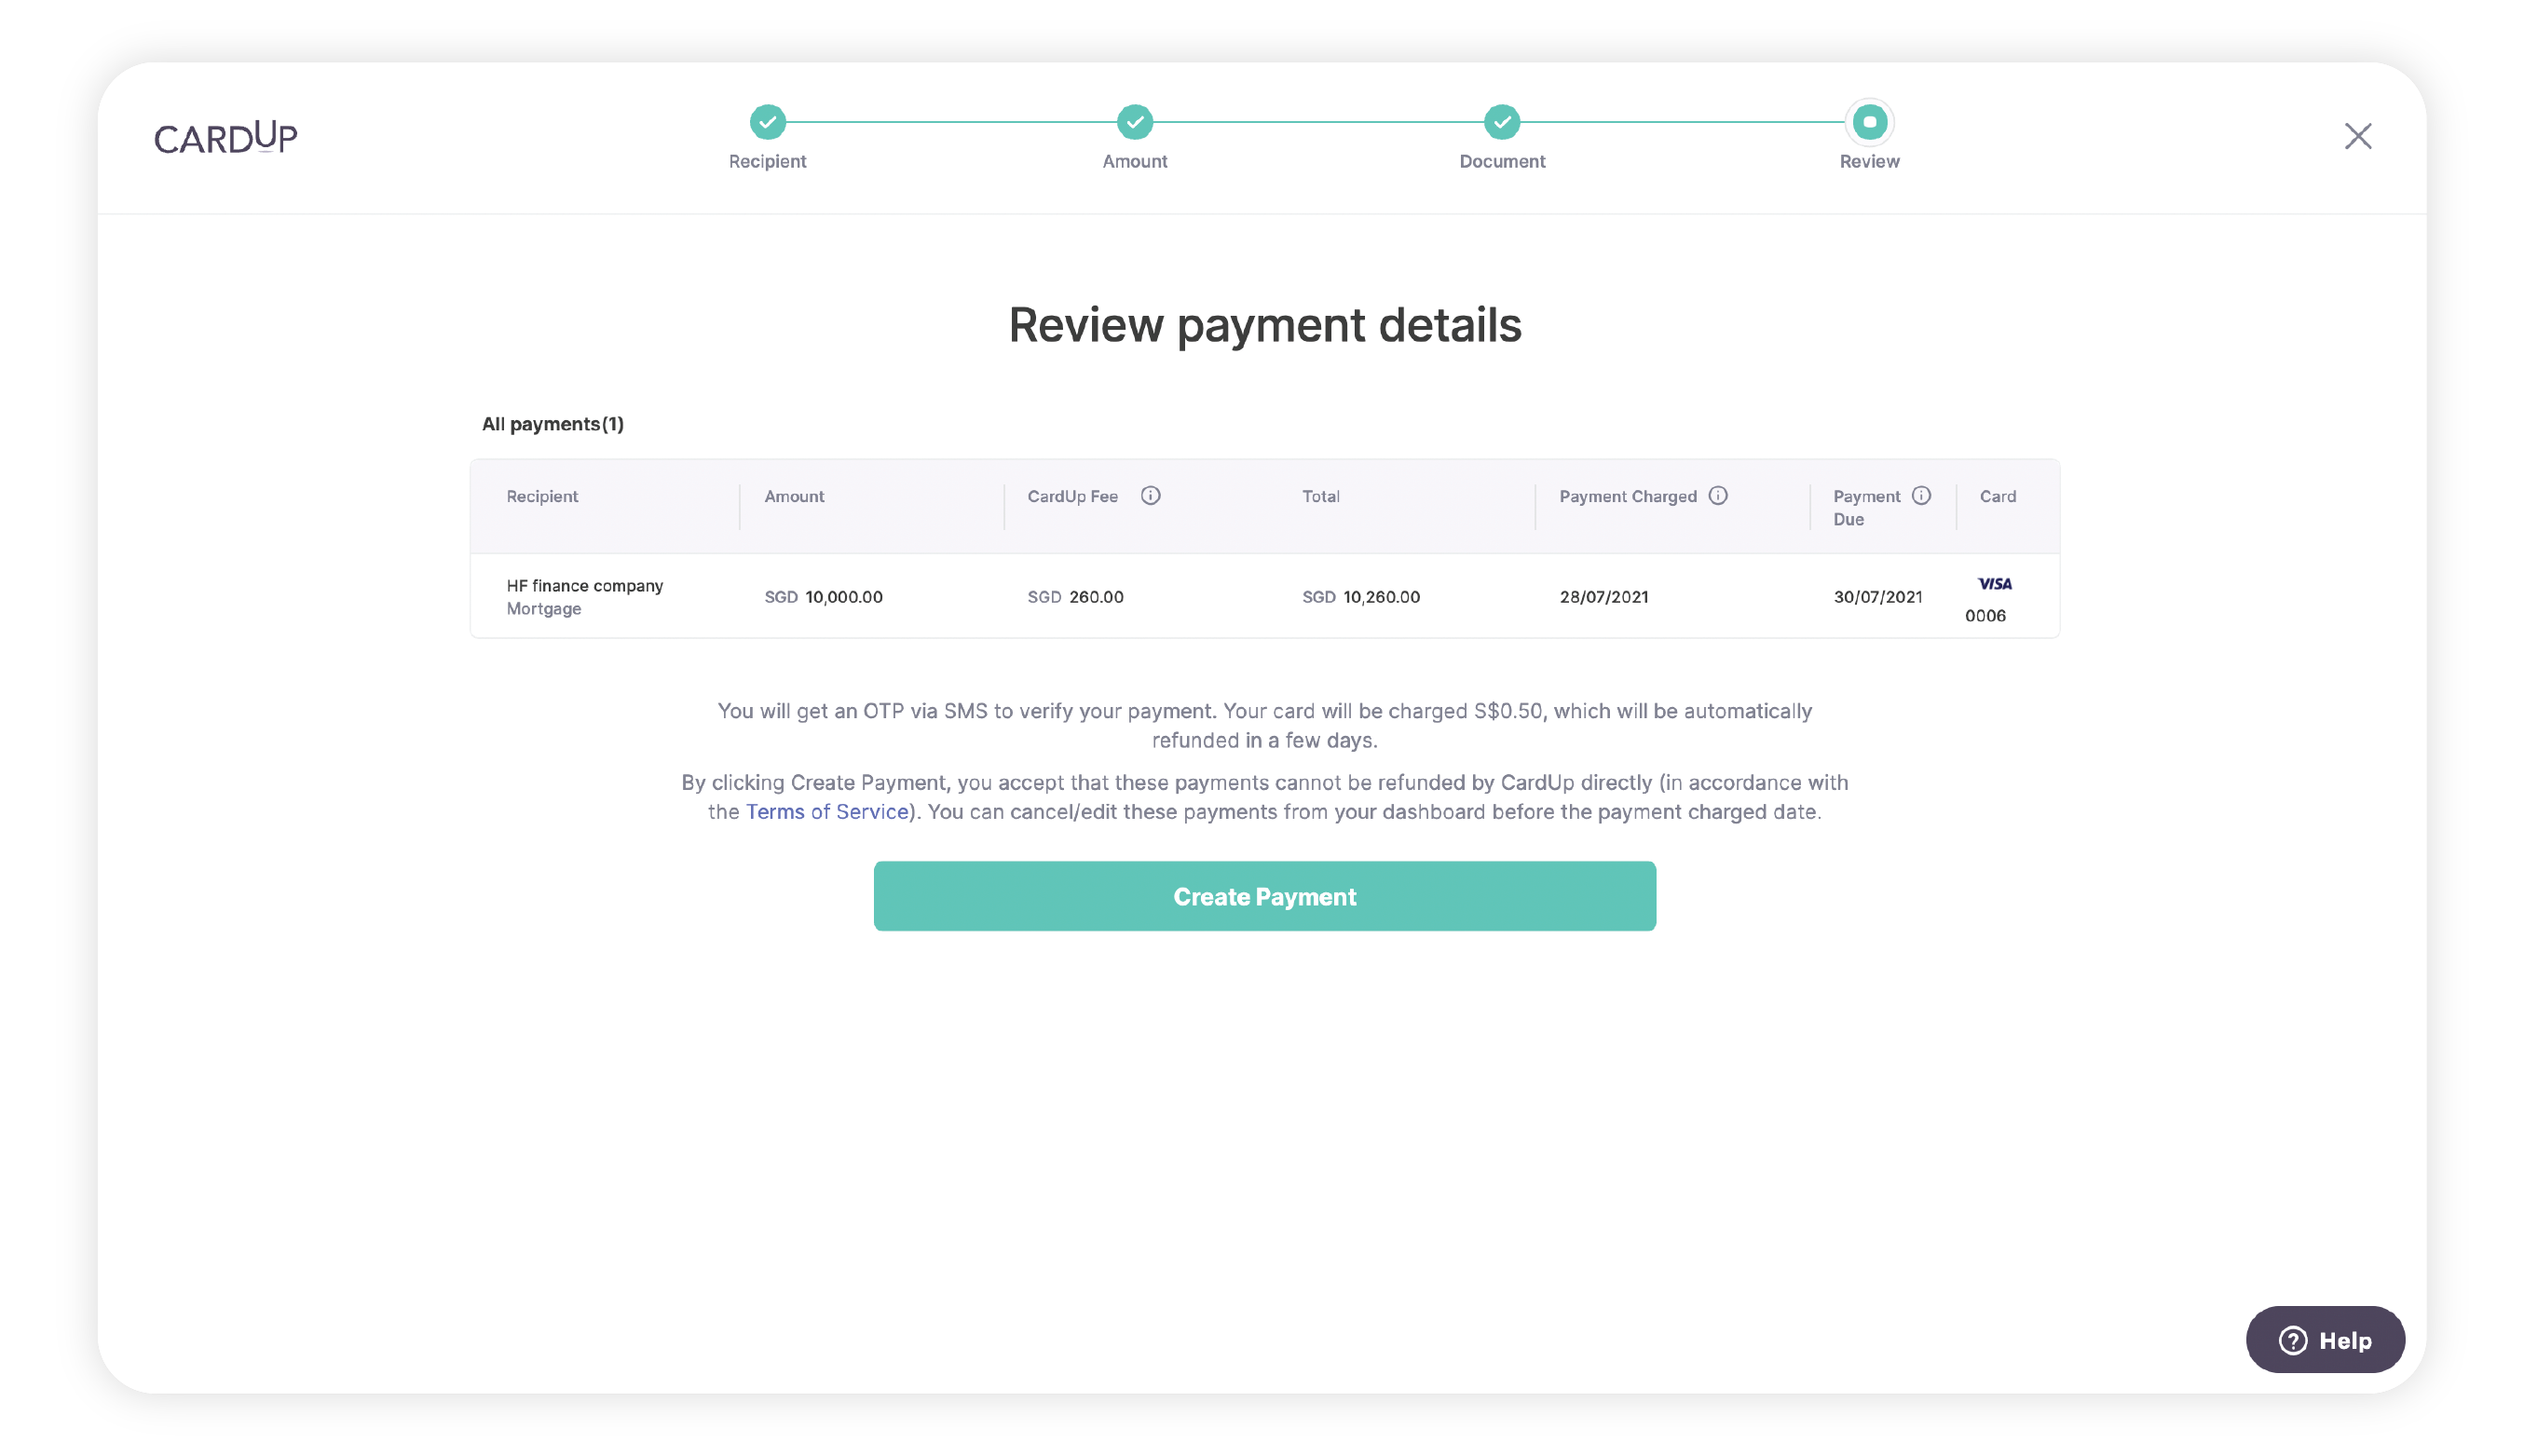 Review payment details